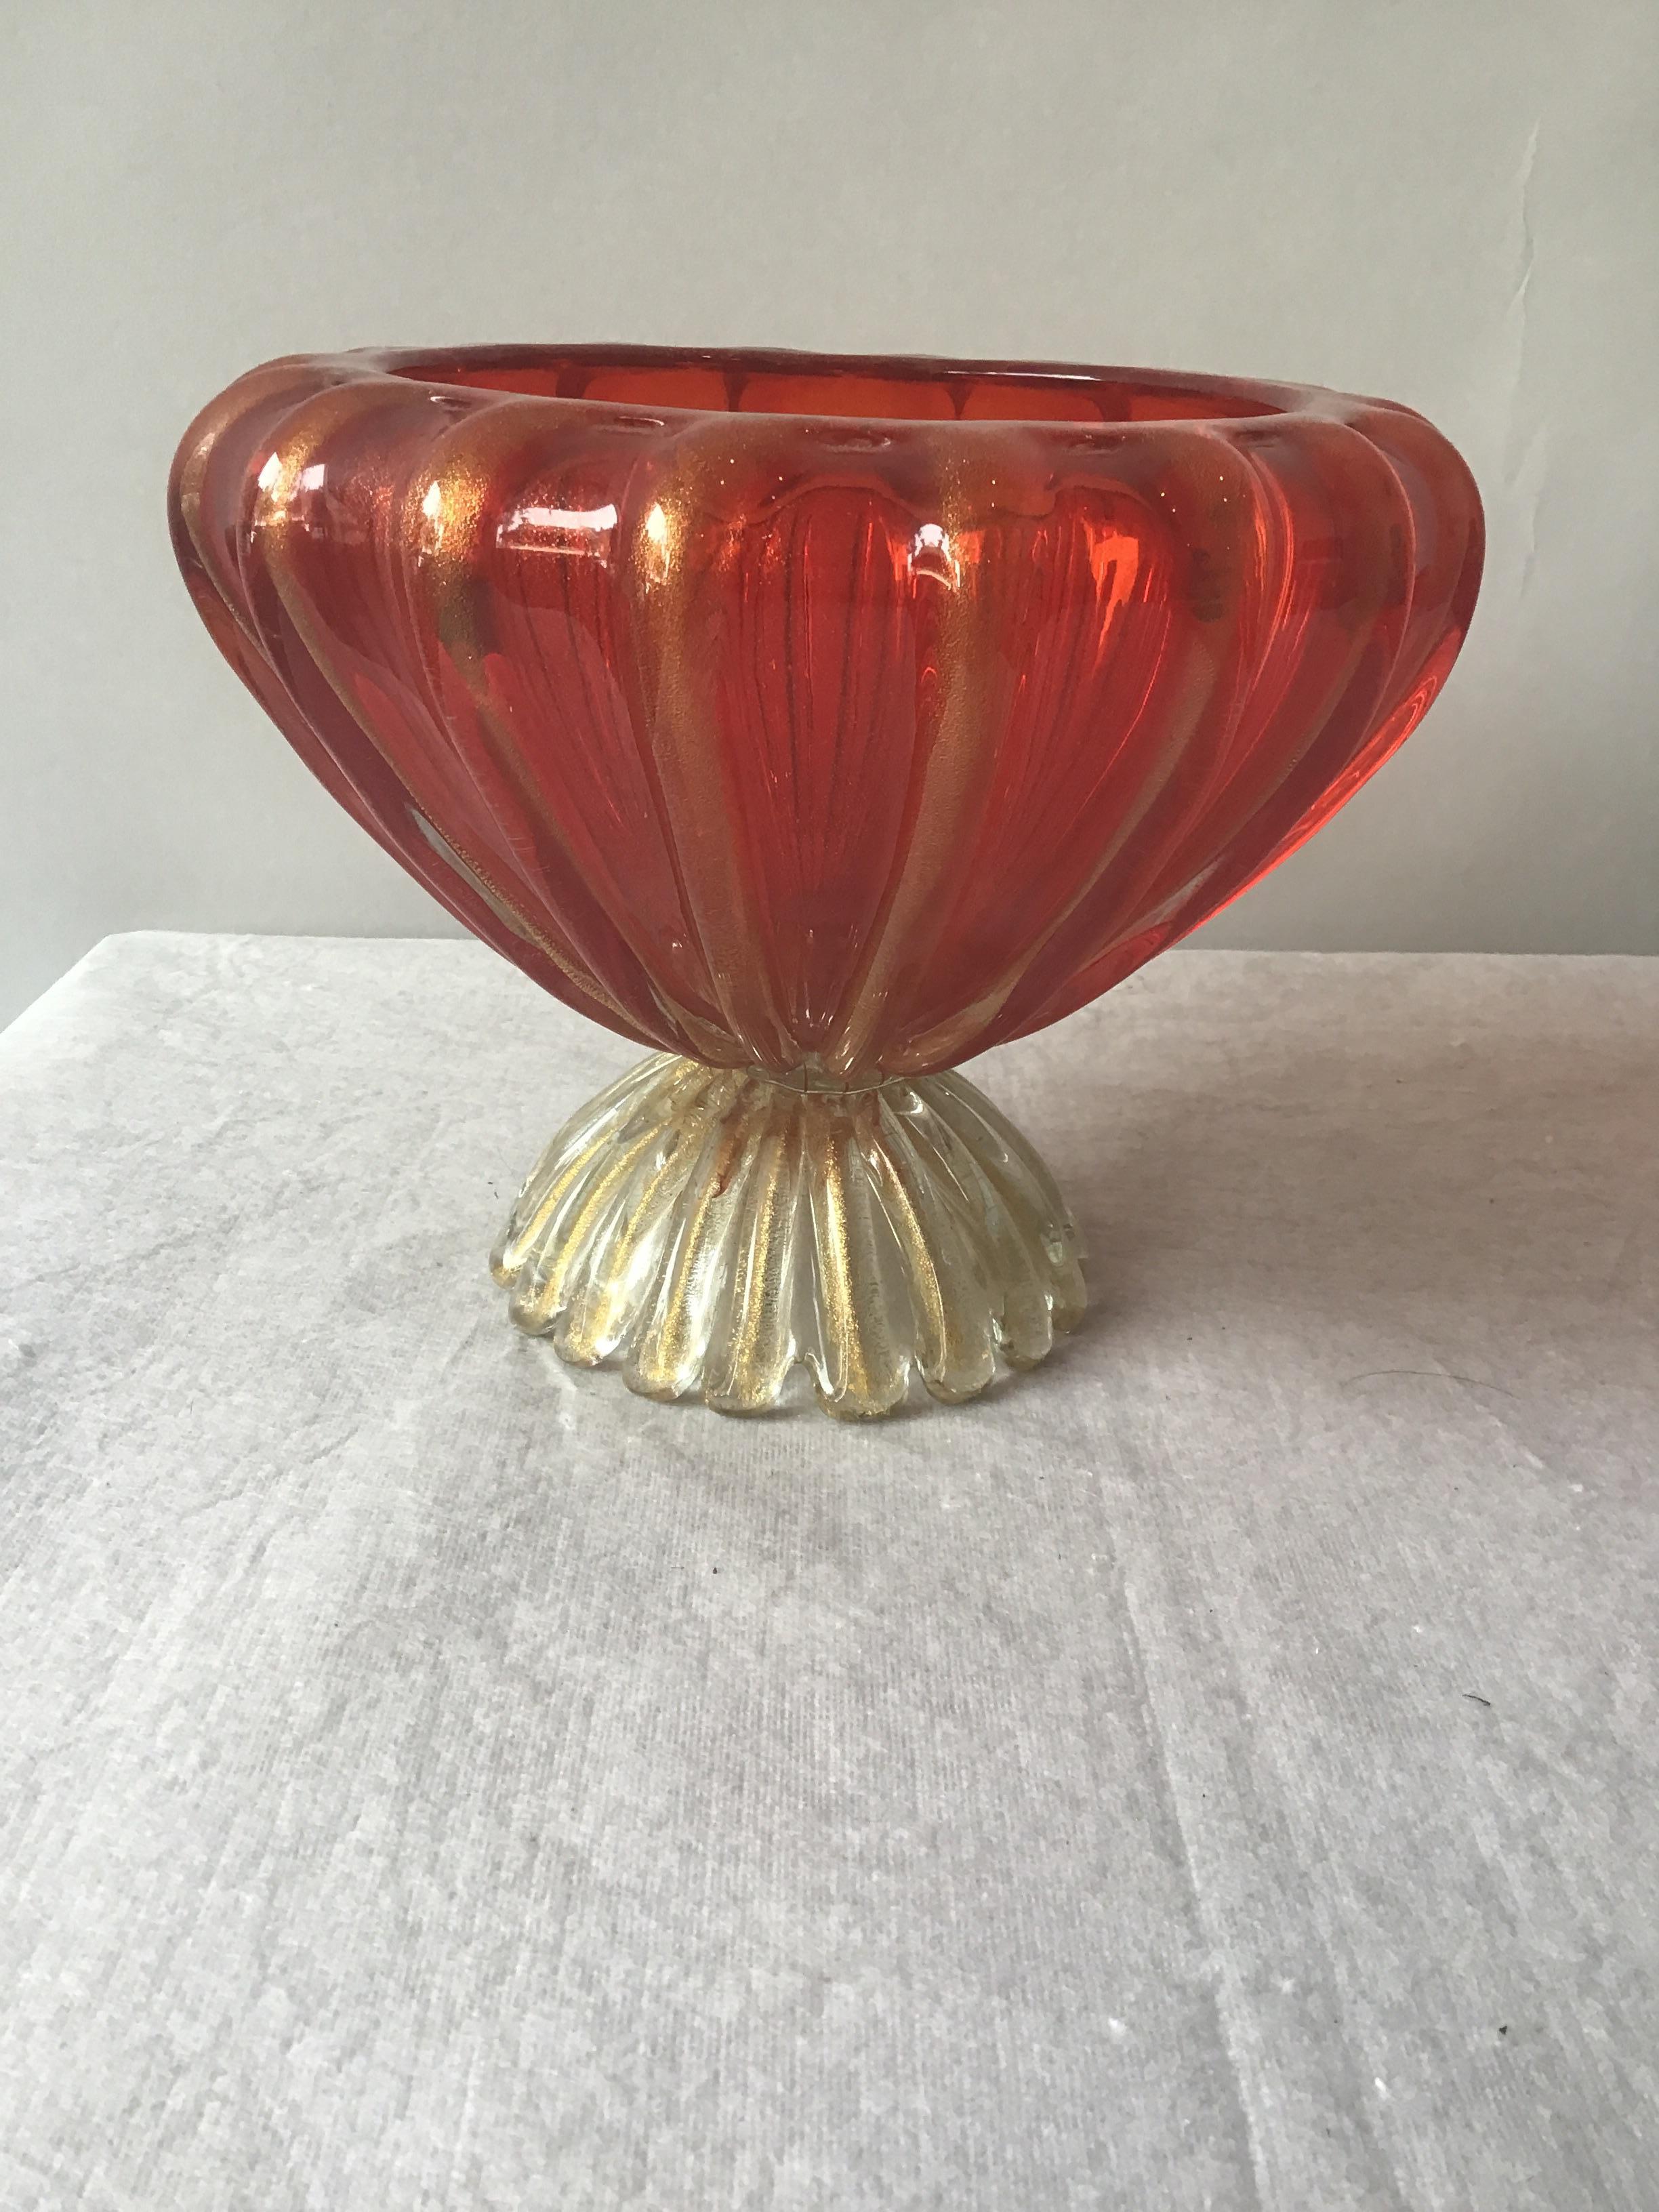 1960s Murano glass. Red bowl with gold flecks.